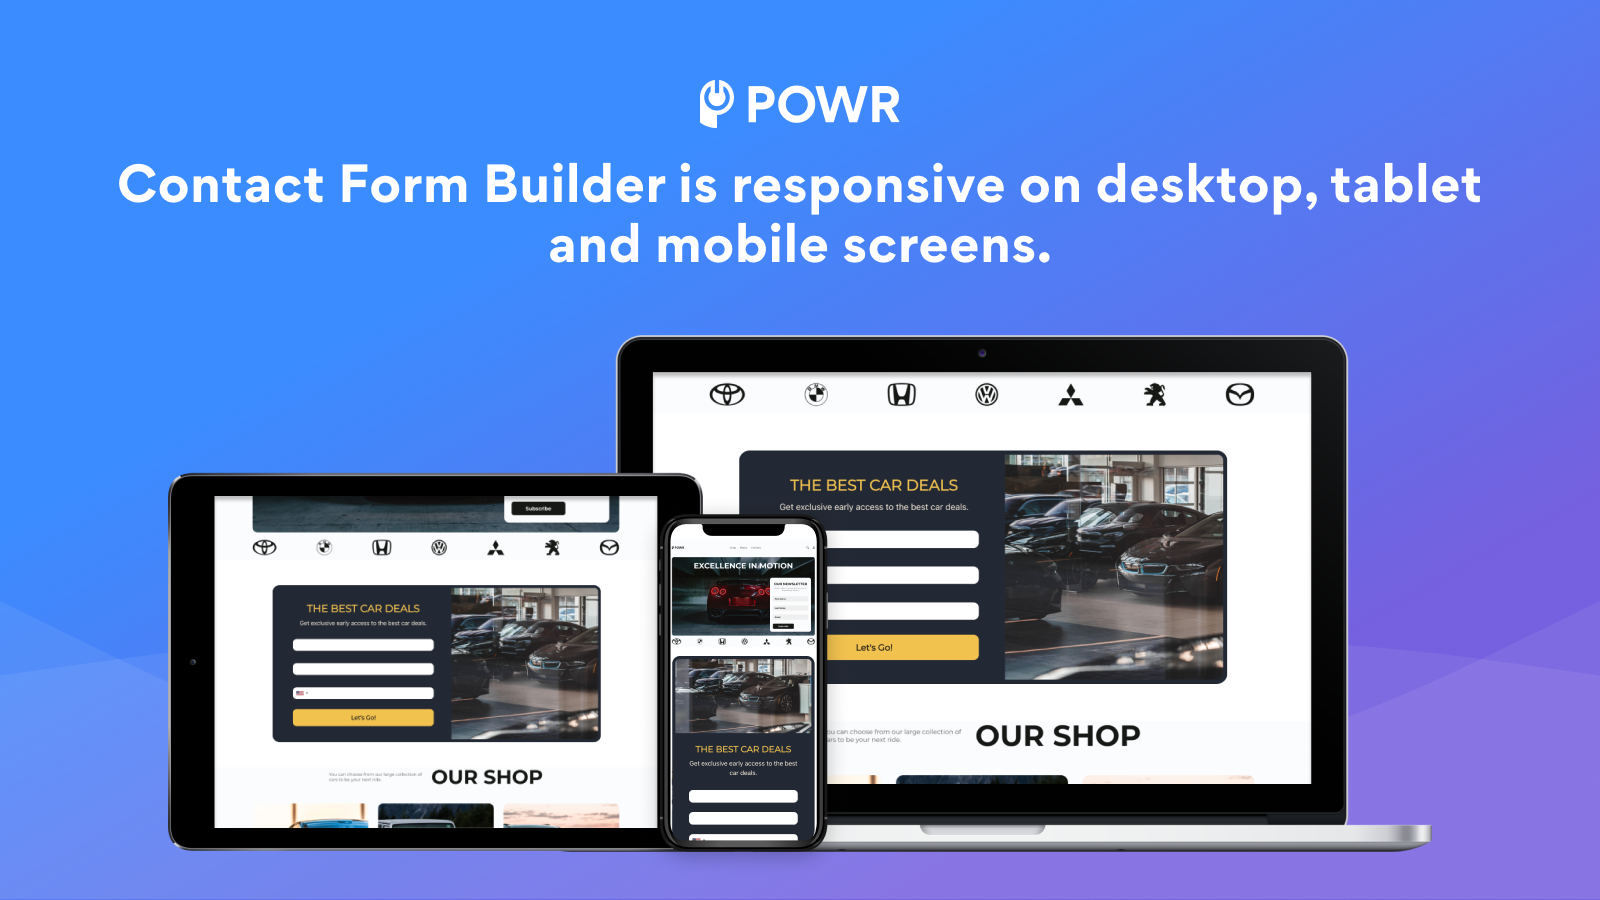 Contact form builder is responsive on all devices.